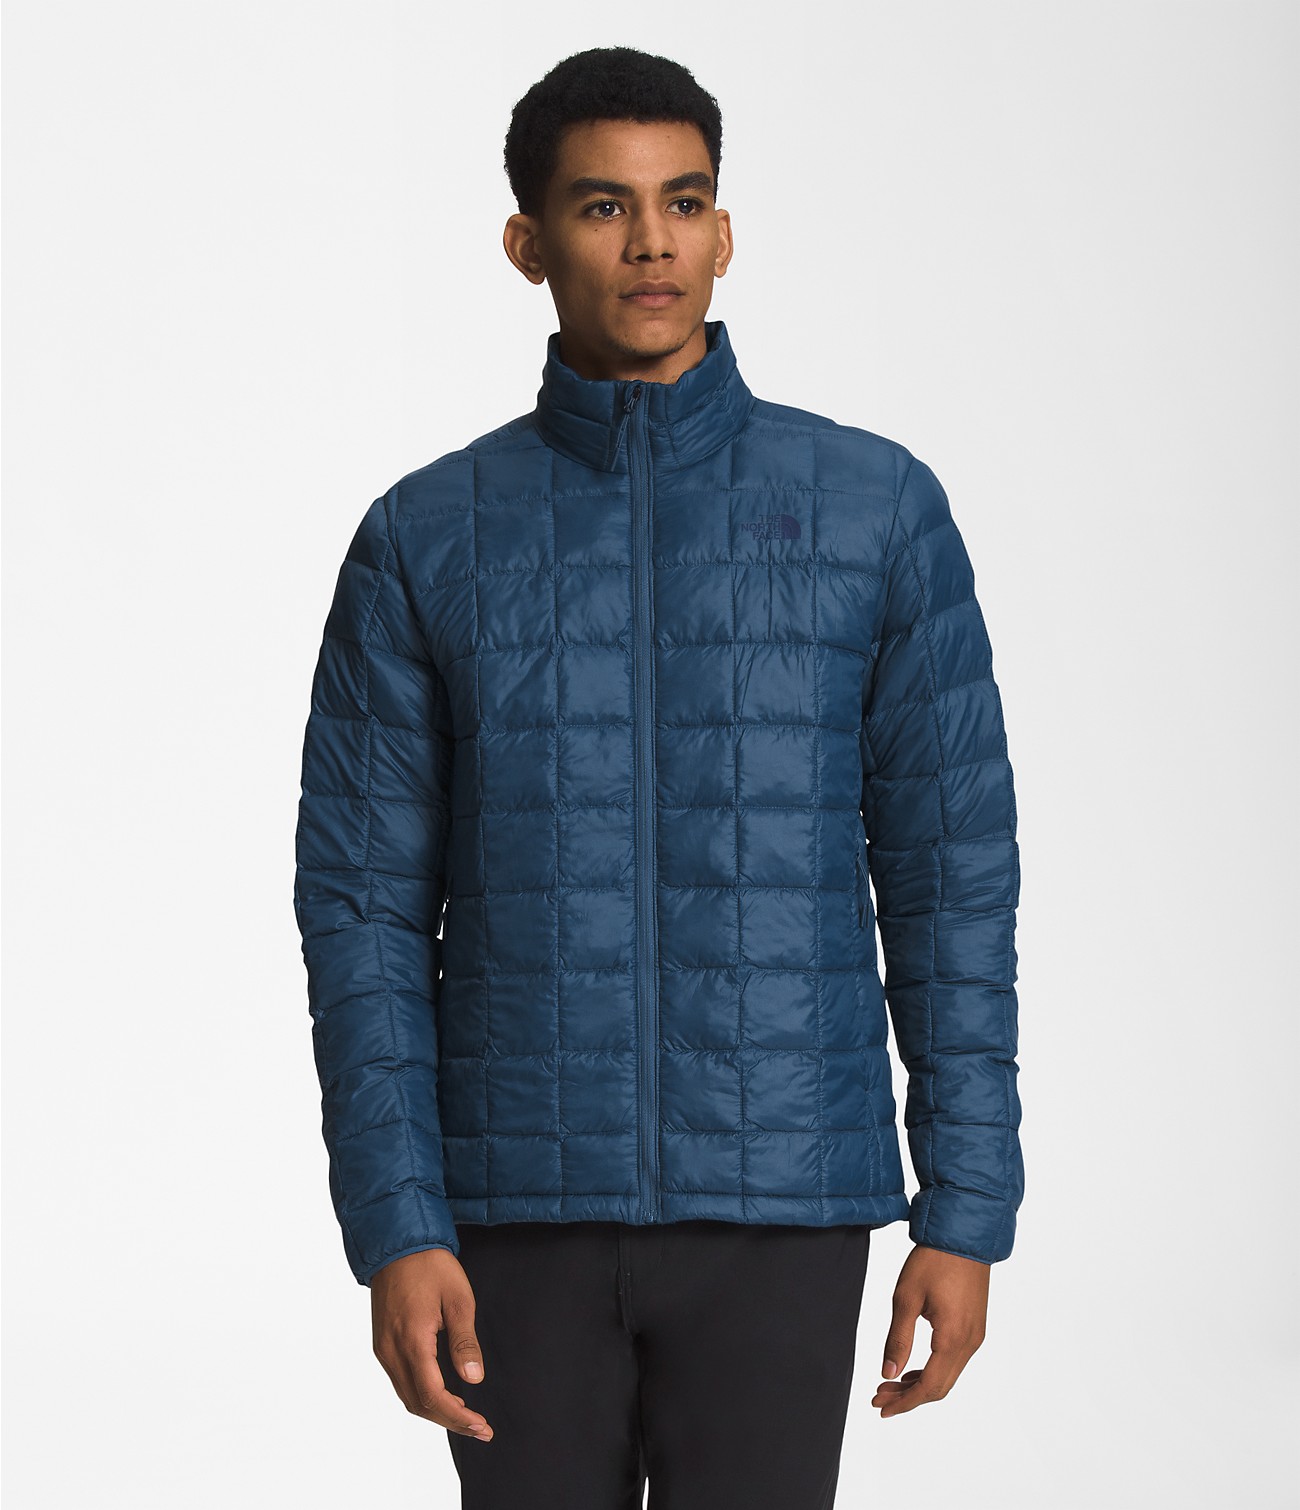 Unlock Wilderness' choice in the Lululemon Vs North Face comparison, the ThermoBall™ Eco Jacket 2.0 by The North Face